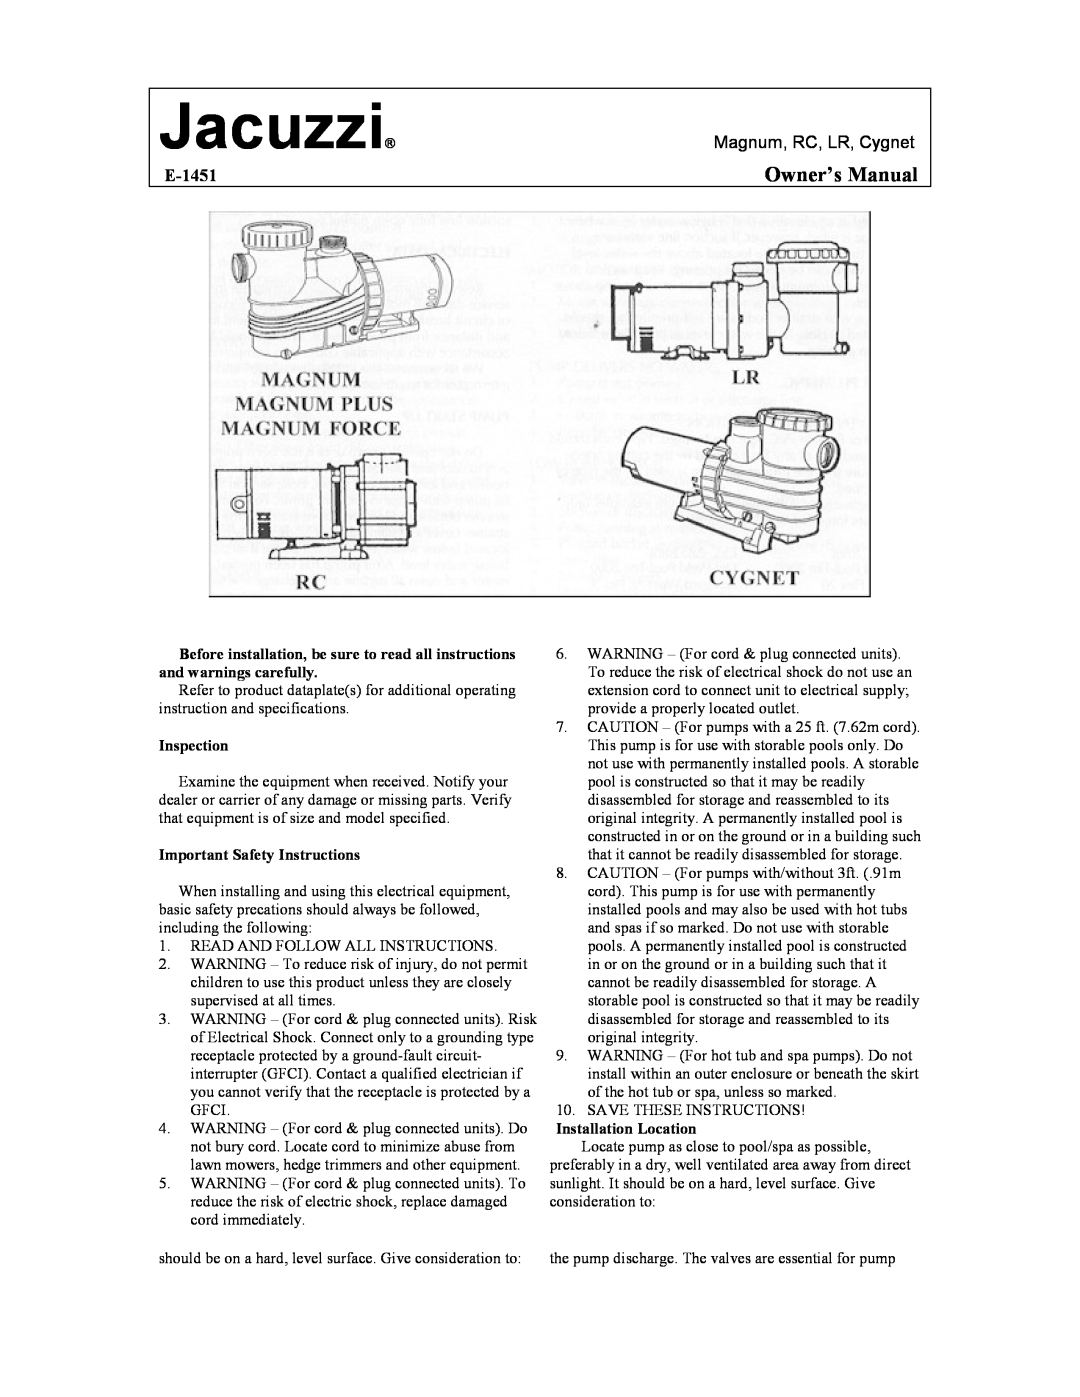 Jacuzzi E-1451 owner manual Jacuzzi, Magnum, RC, LR, Cygnet, Inspection, Important Safety Instructions 